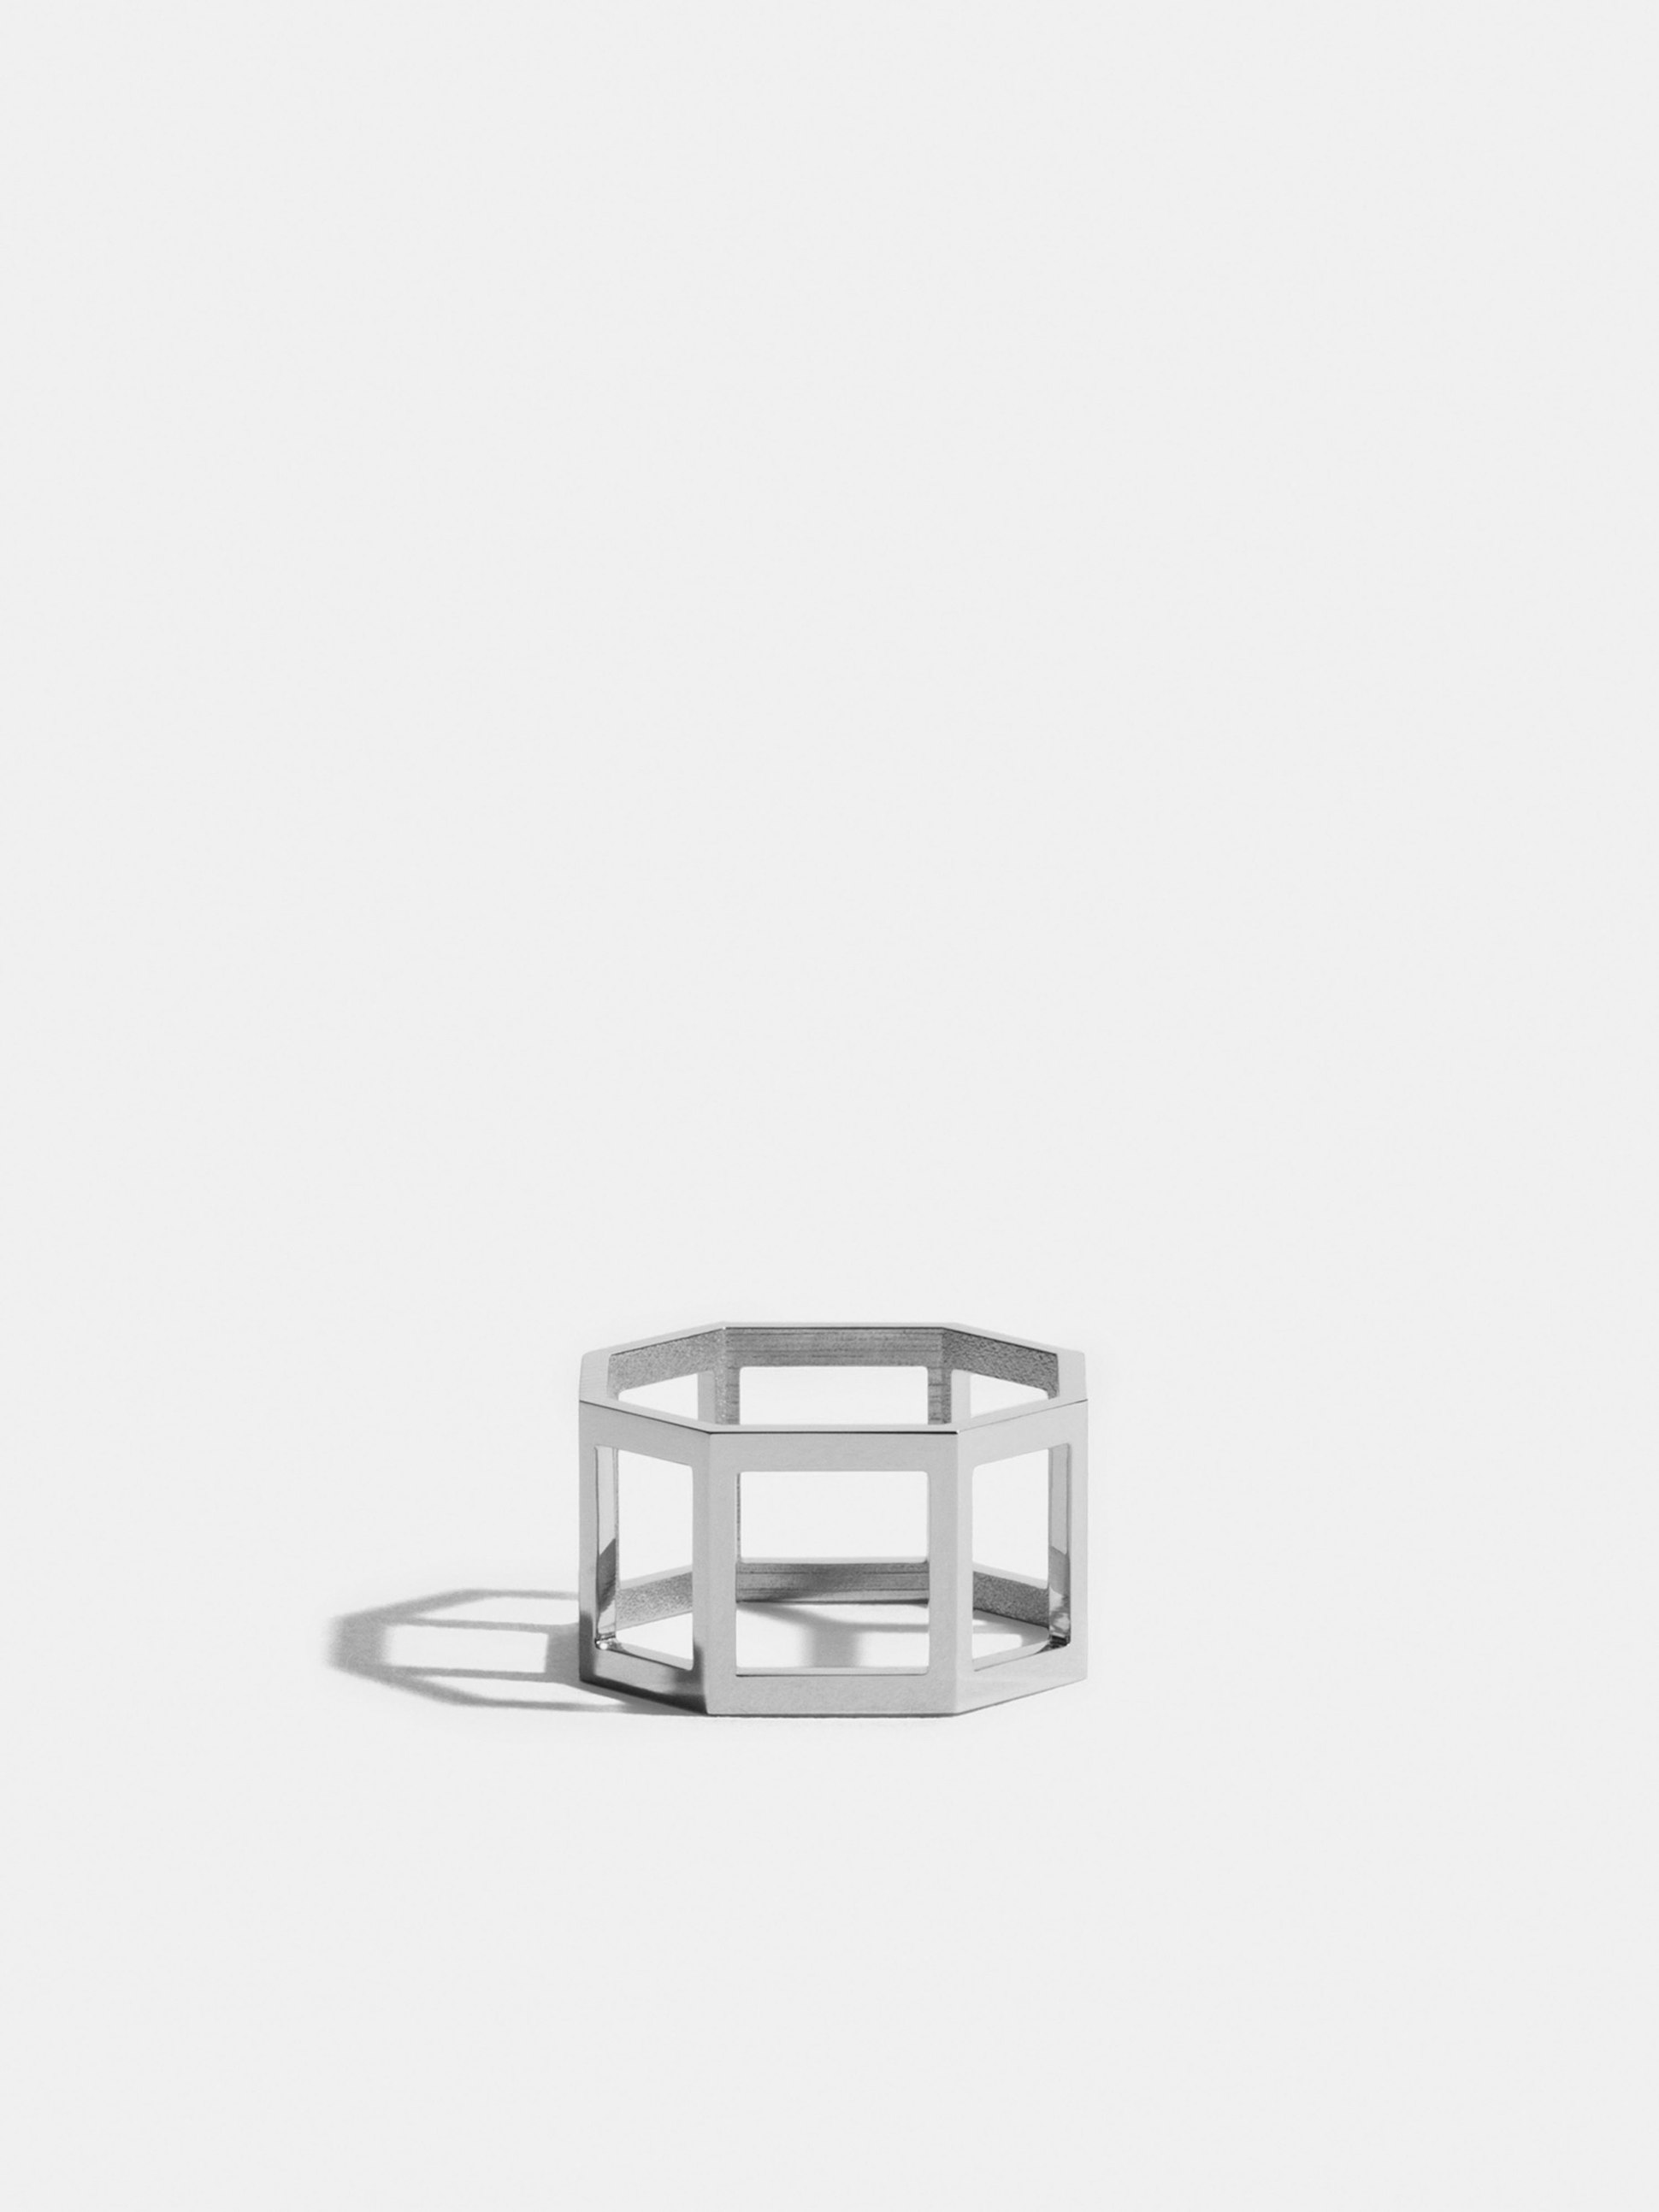 Octogone structured ring in 18k Fairmined ethical white gold (11mm)